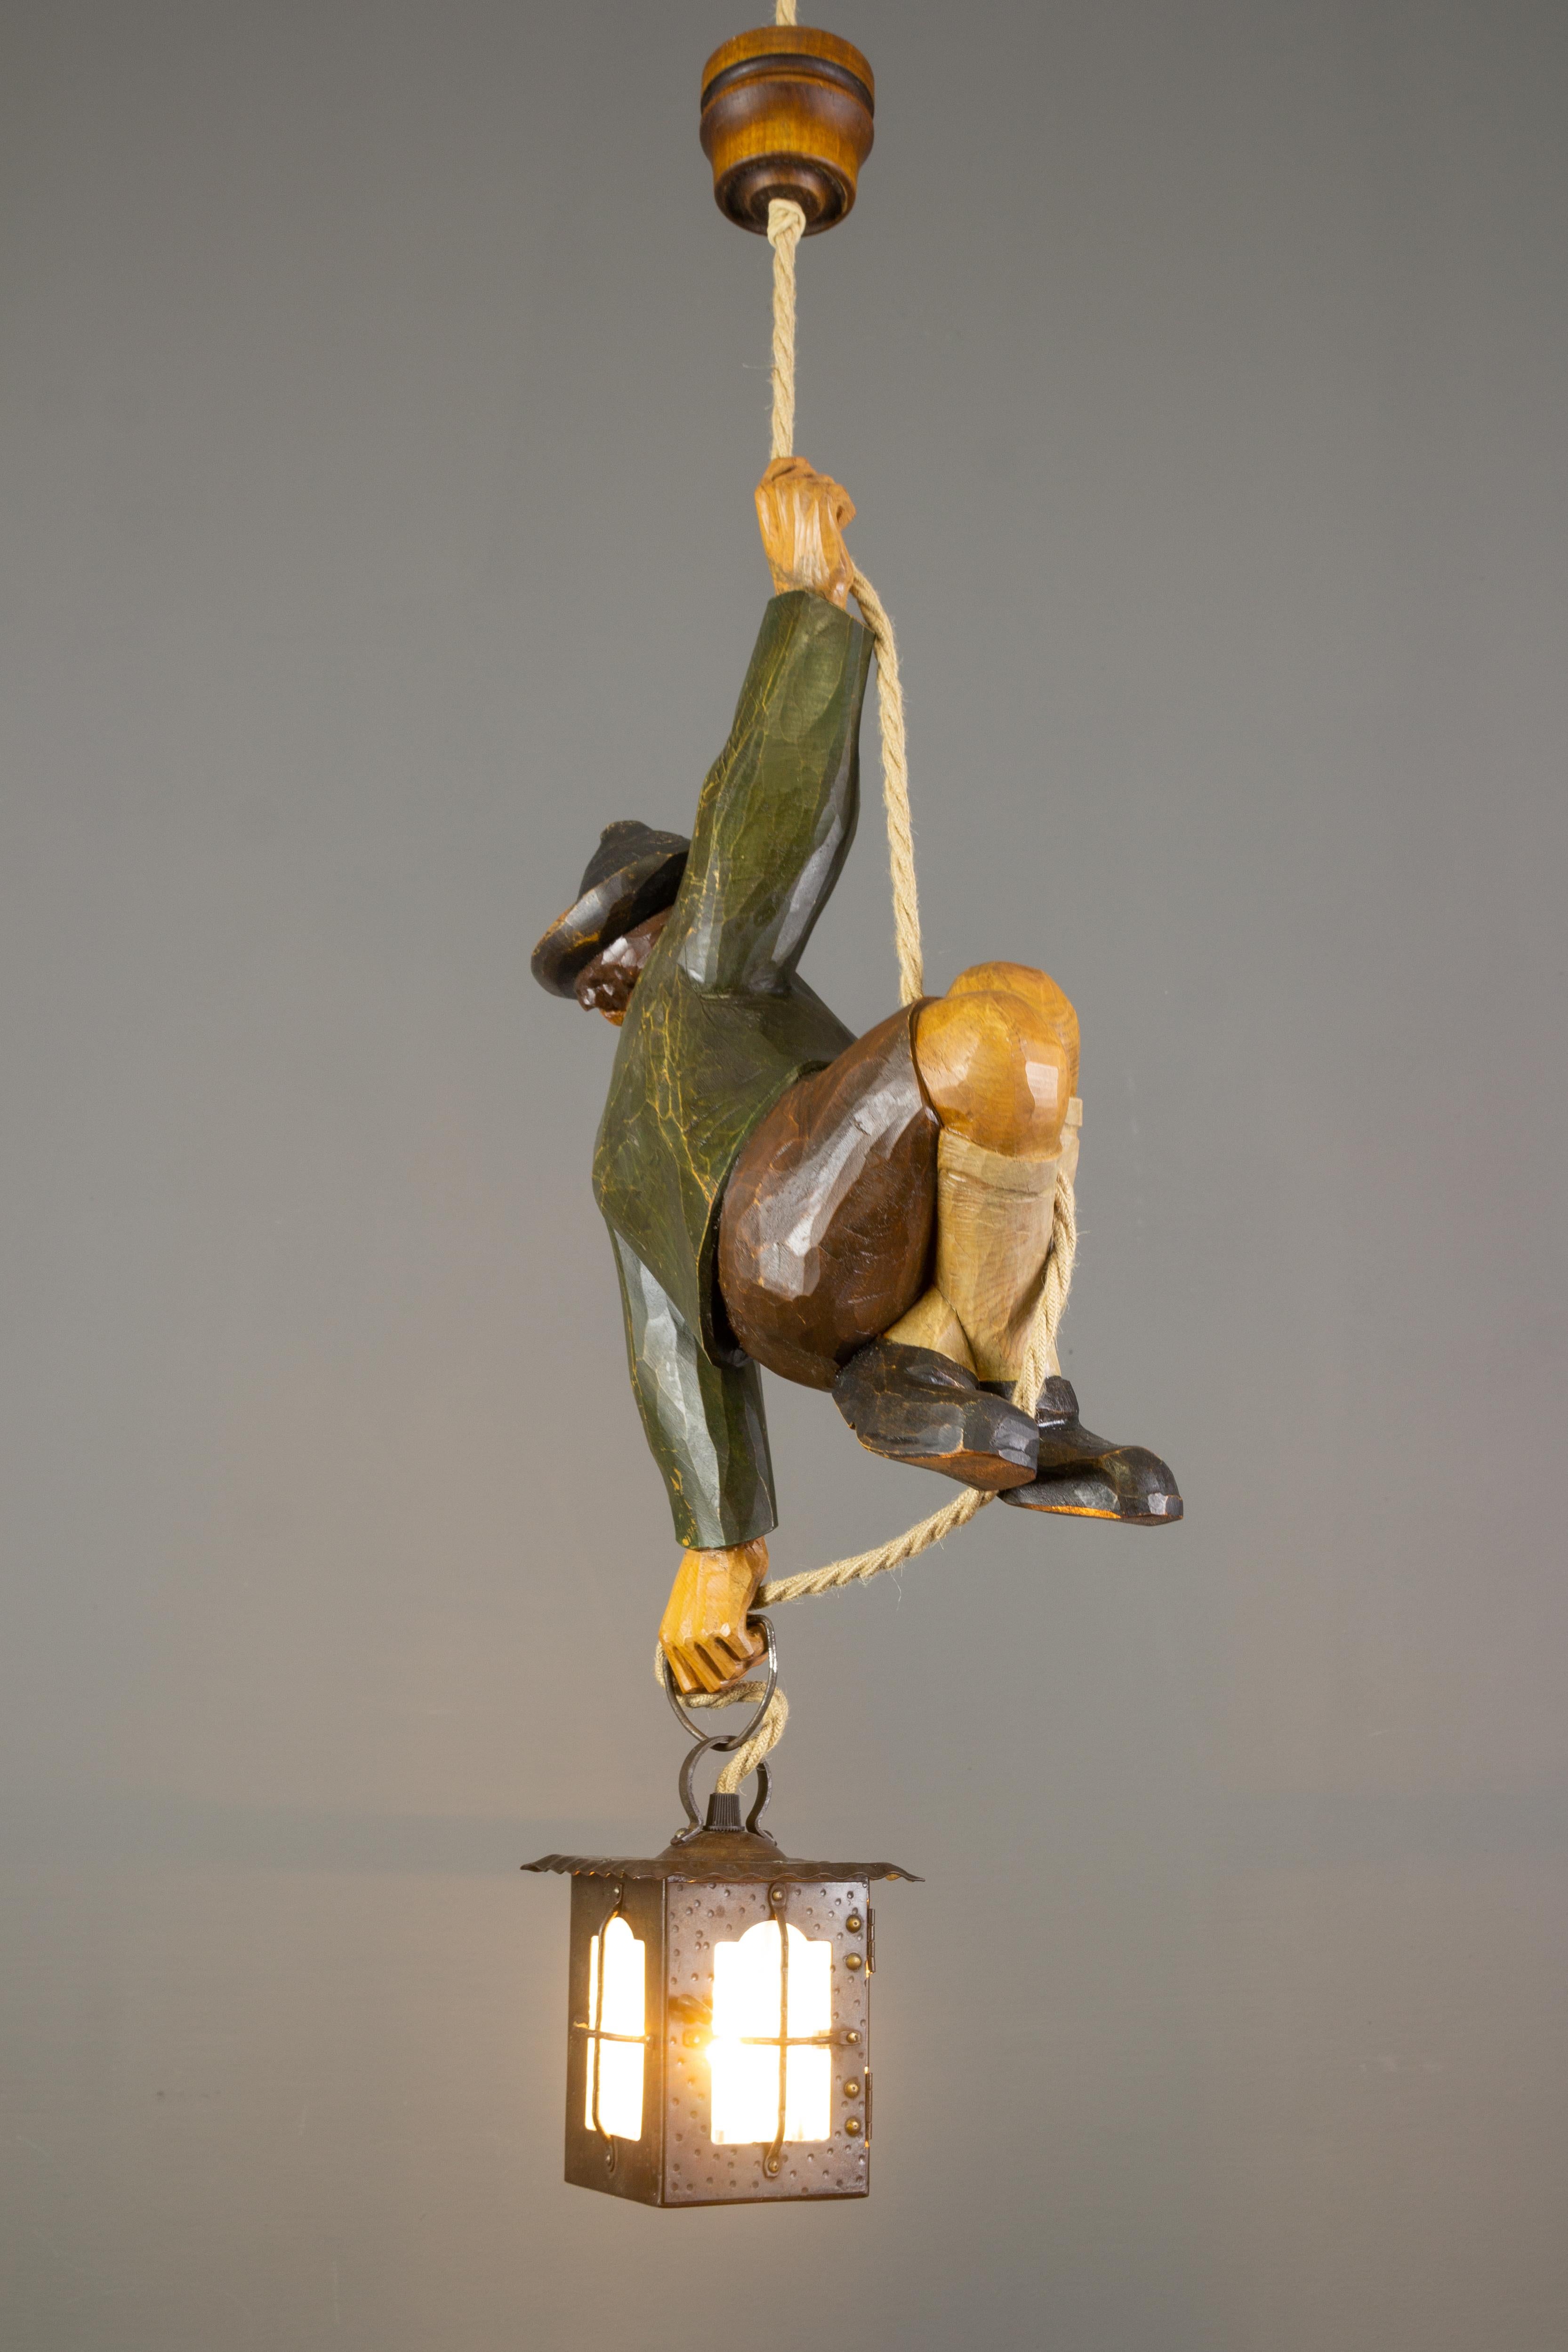 Black Forest German Hanging Lamp with Hand Carved Sculpture of Mountain Climber and a Lantern